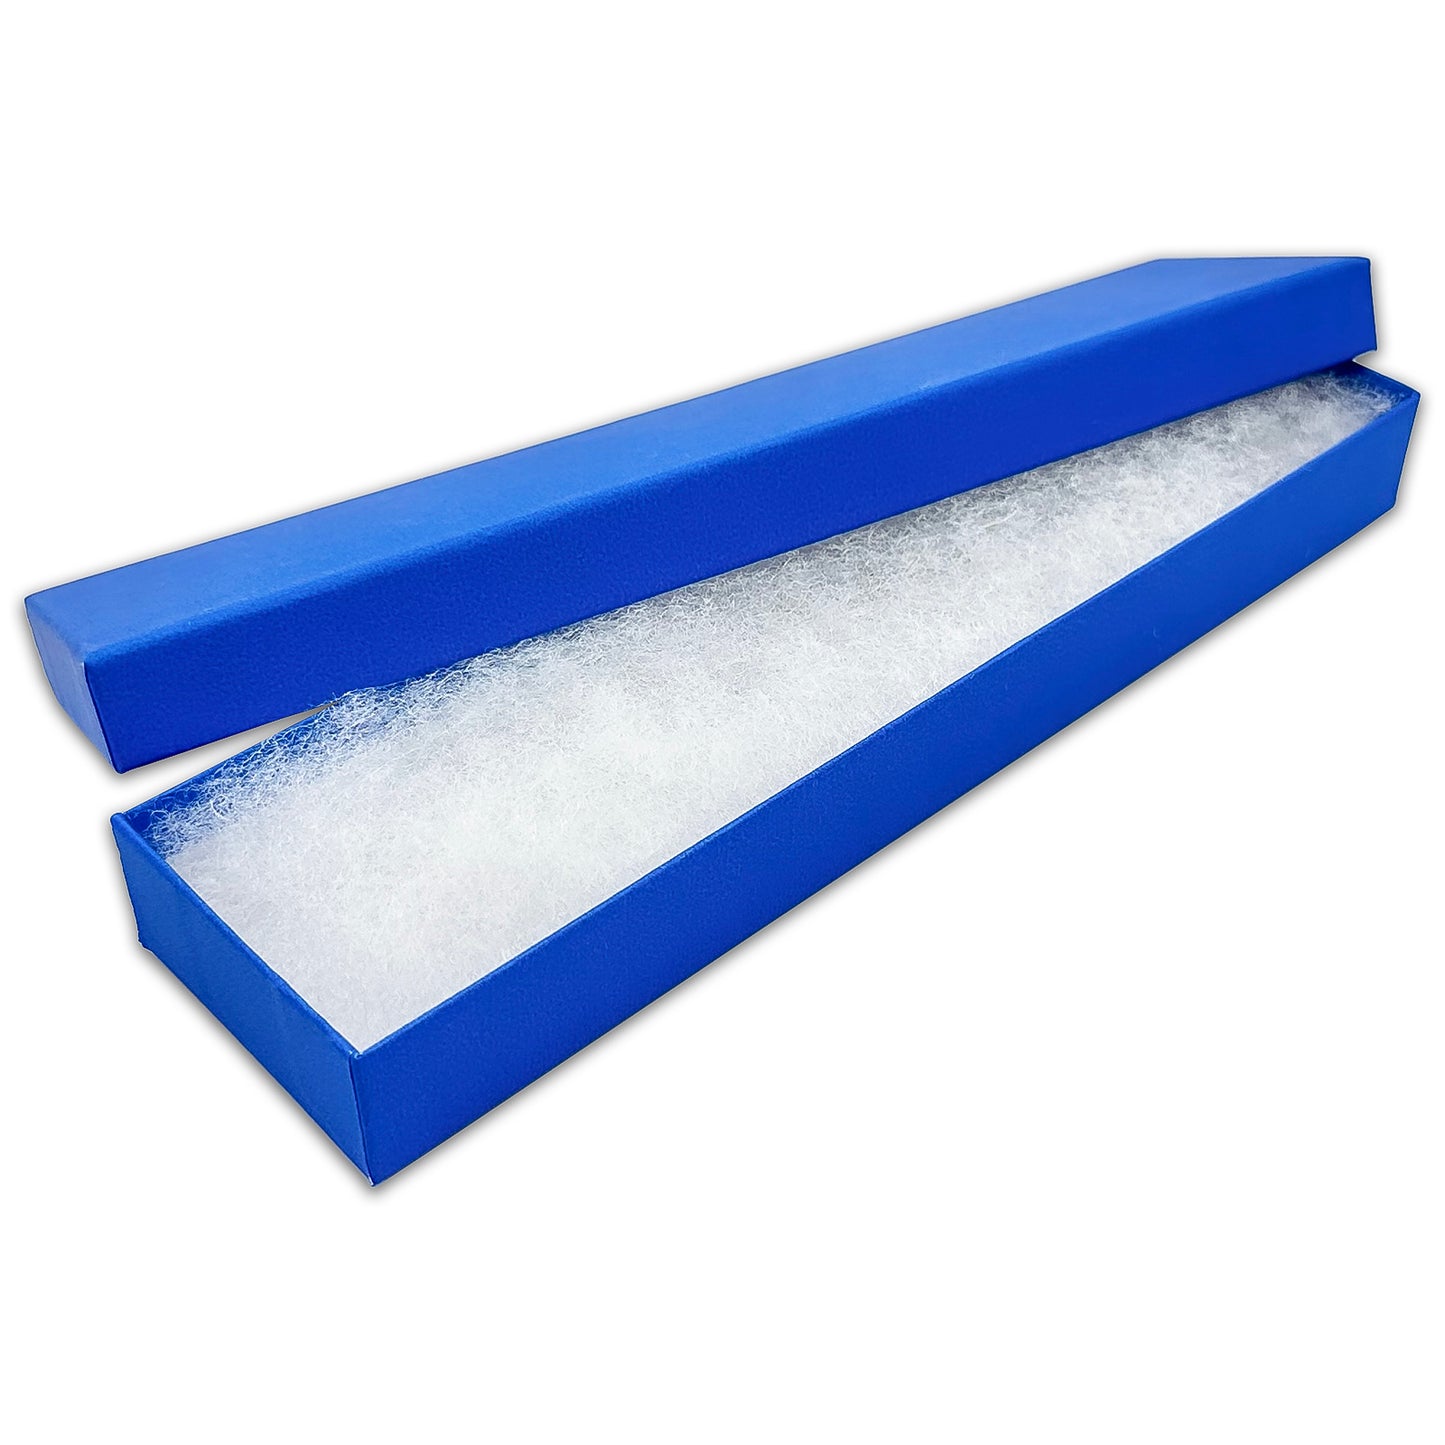 8" x 2" x 1" Neon Blue Cotton Filled Box (25-Pack)